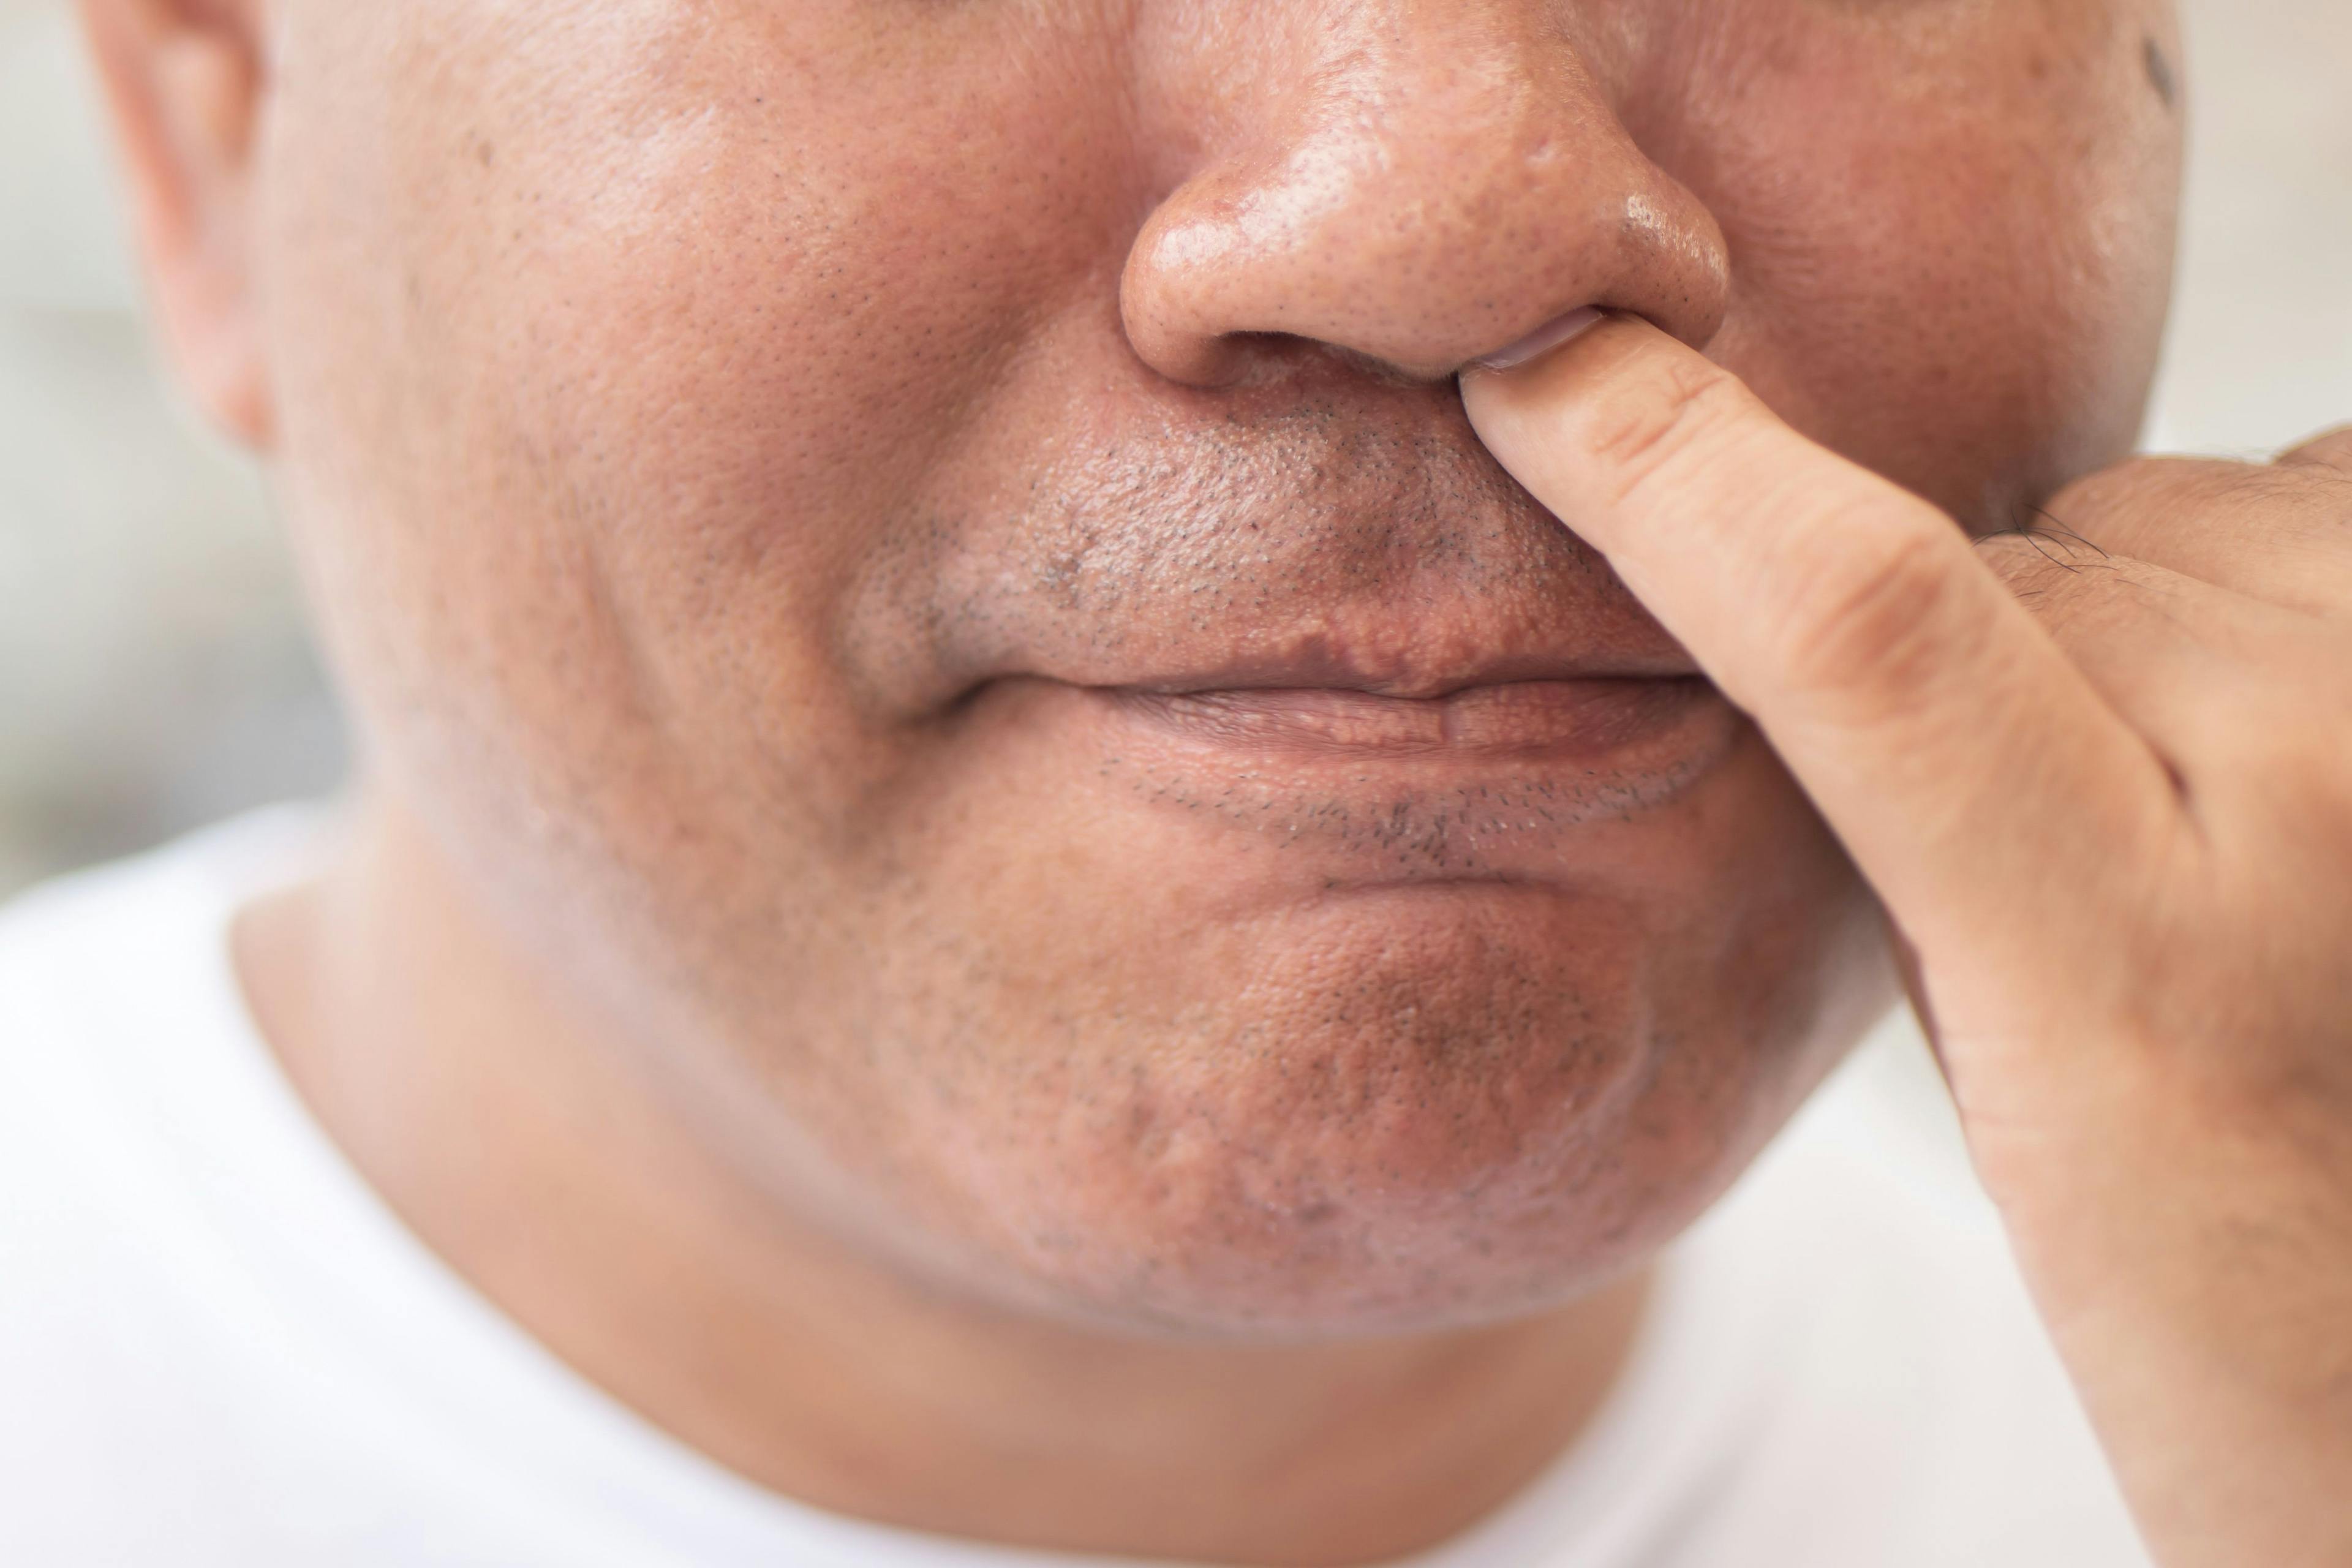 Nose Picking Raises Concern: Healthcare Workers at Higher Risk for COVID-19 Transmission